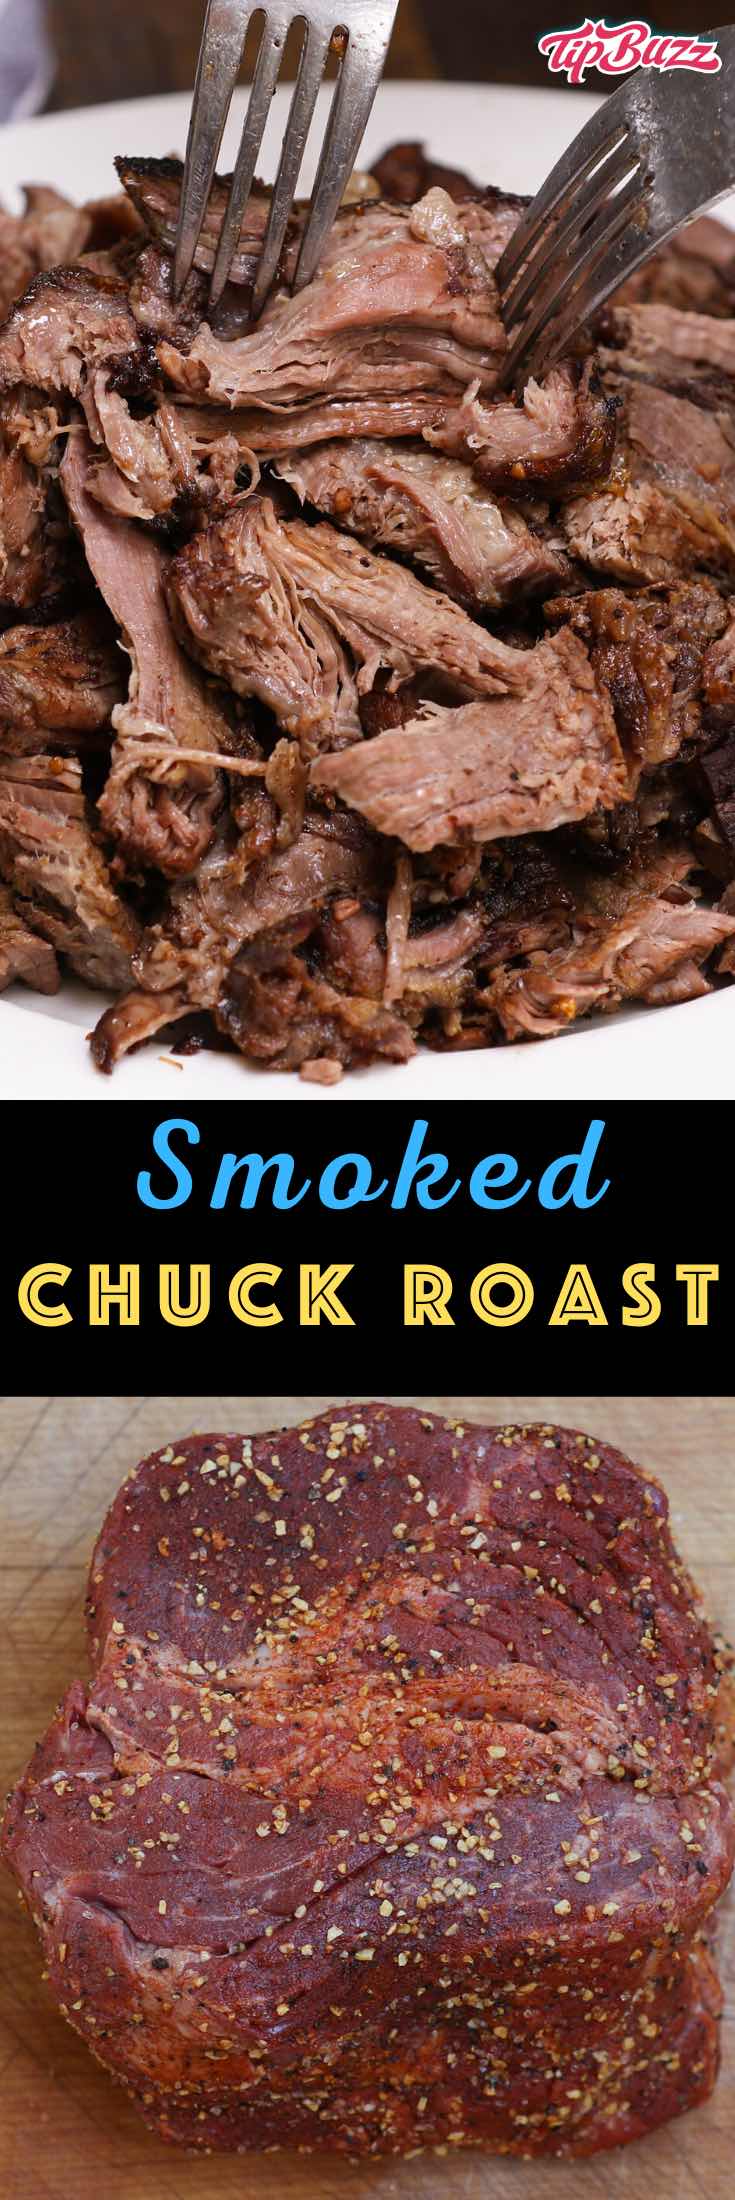 Smoked Chuck Roast that melts in your mouth with irresistible smokey flavors! This BBQ is easy to make and budget-friendly too! #smokedchuckroast #beefbarbecue